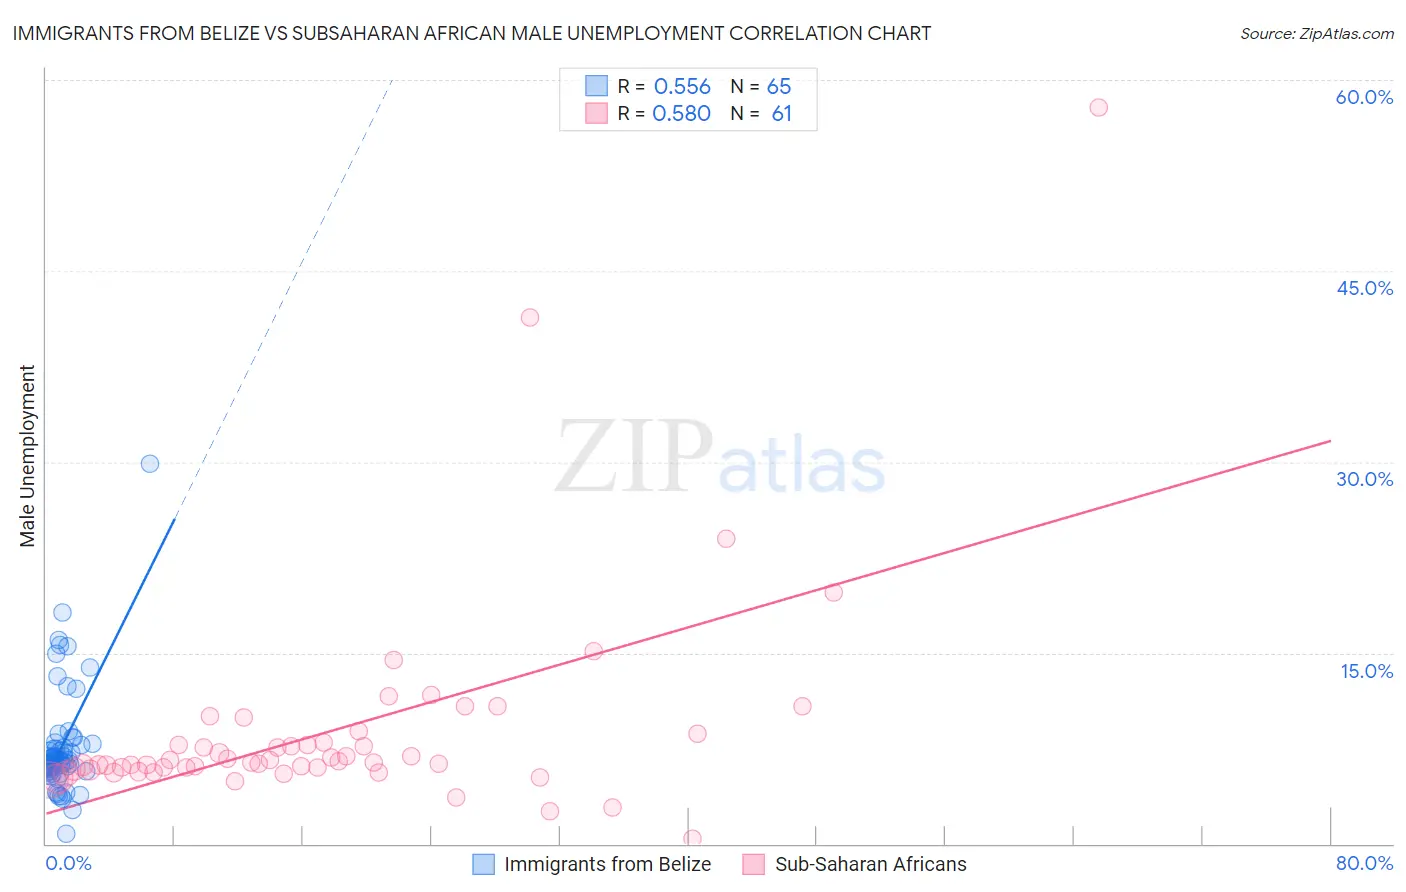 Immigrants from Belize vs Subsaharan African Male Unemployment